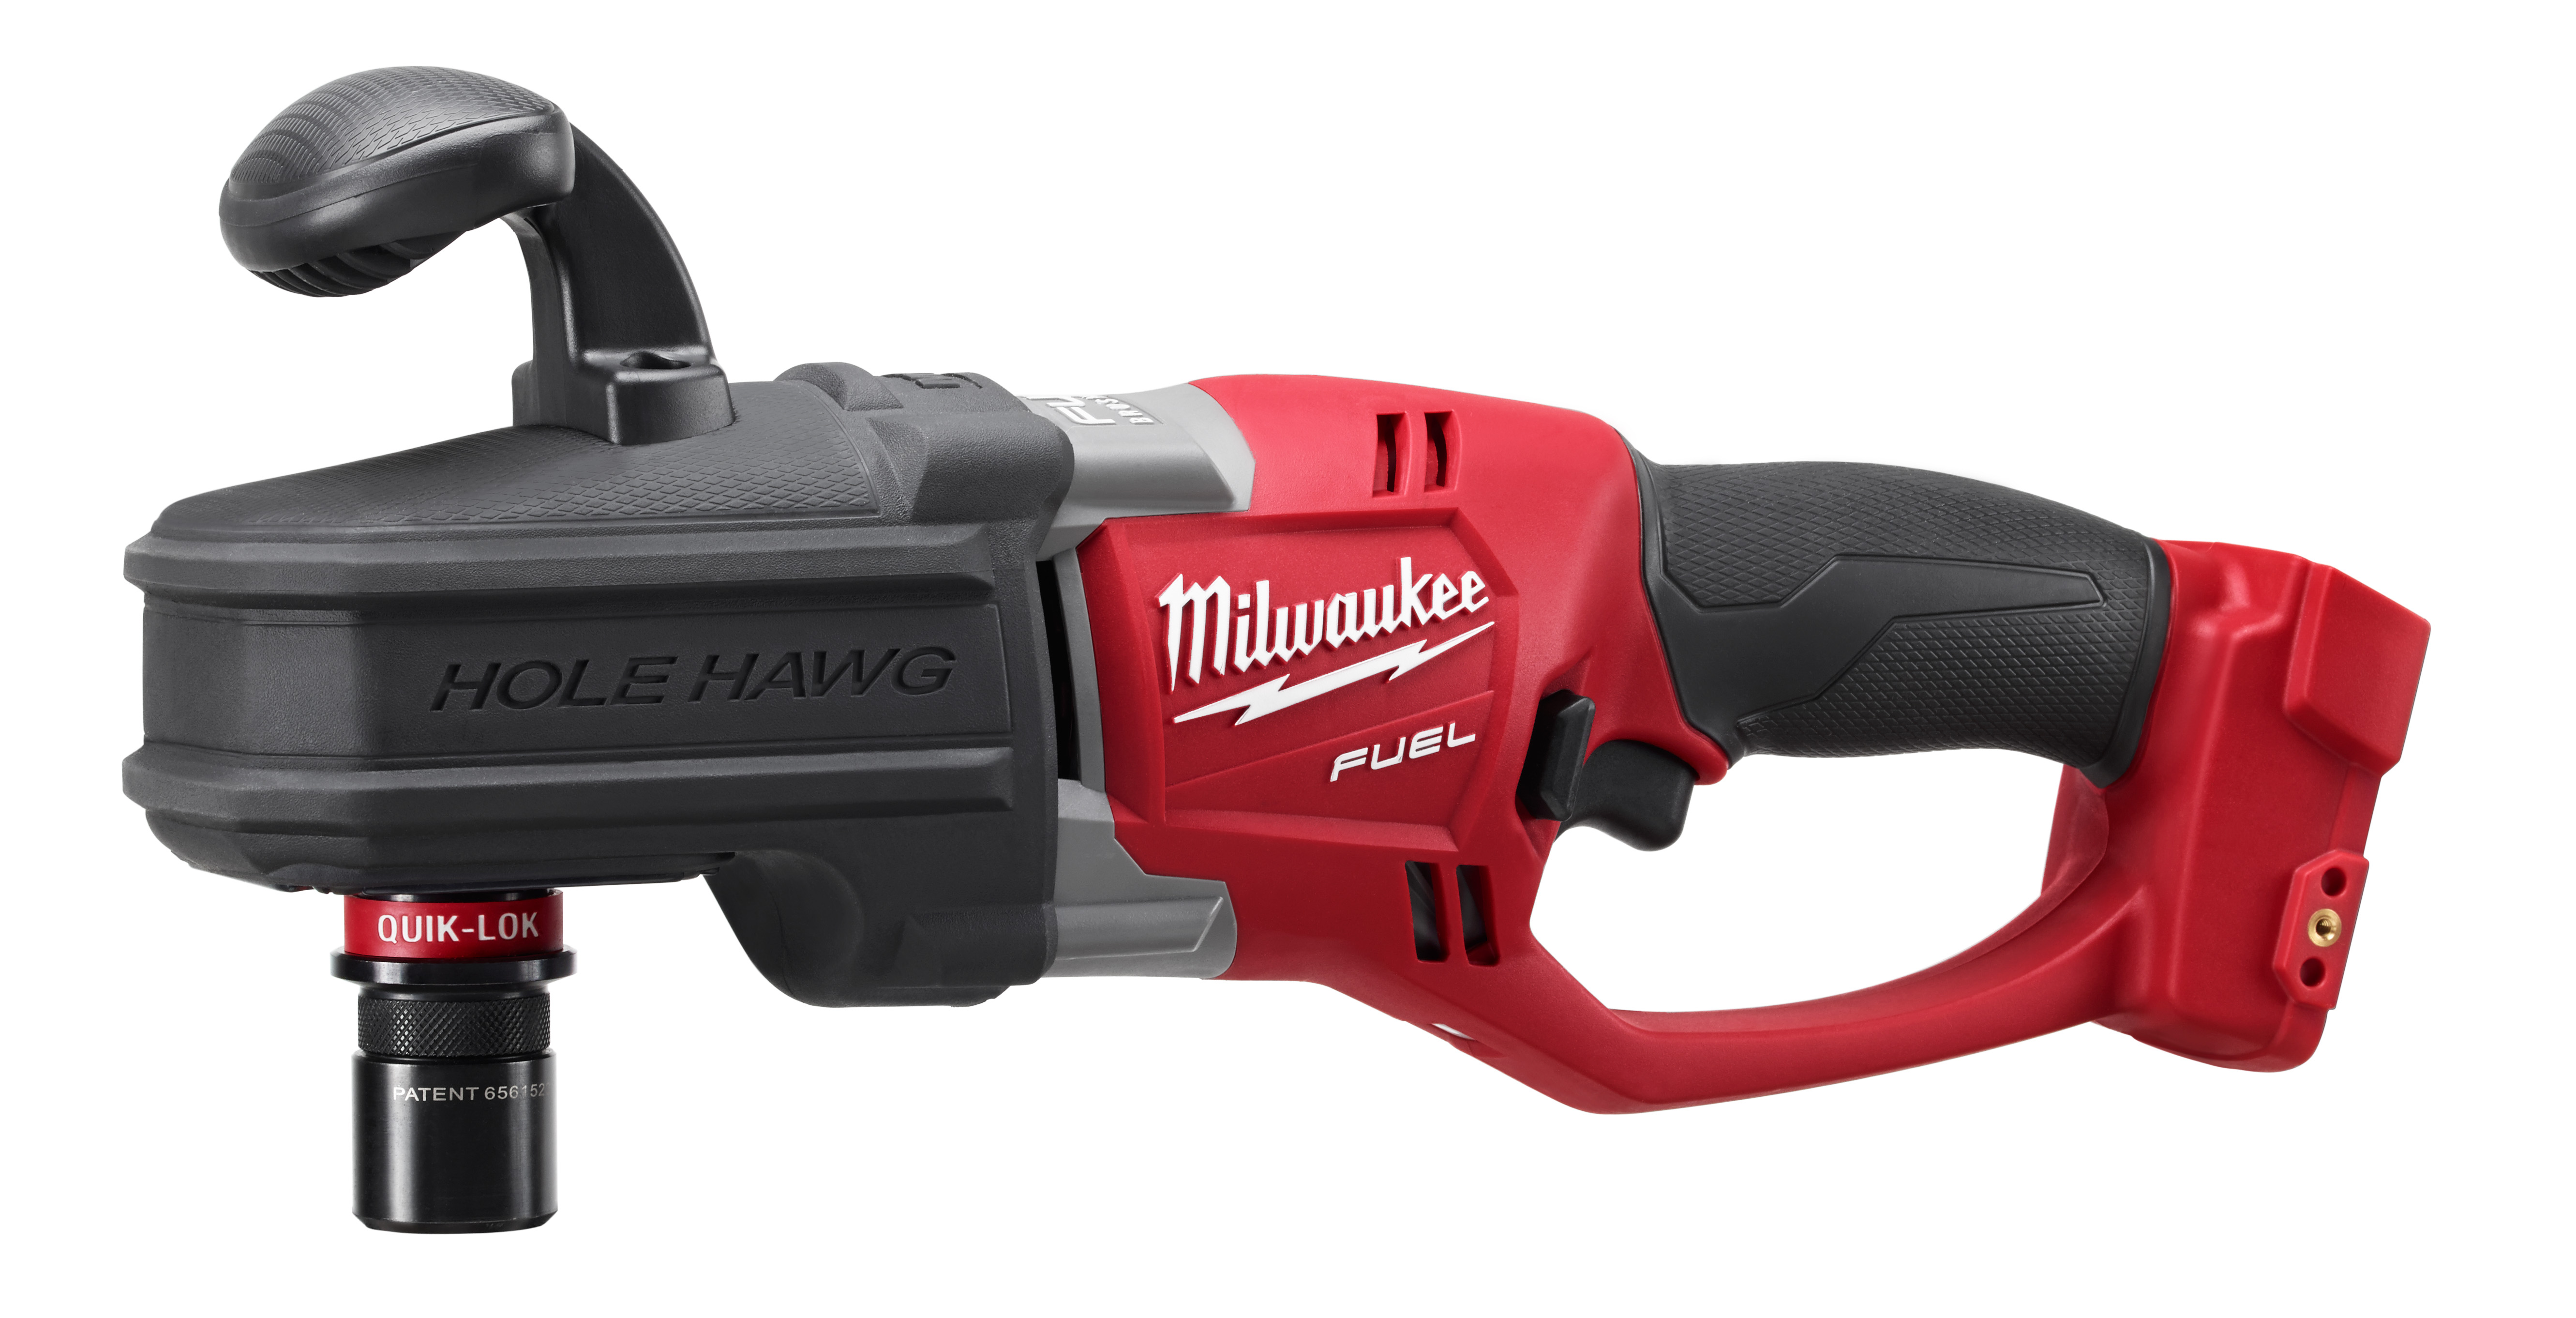 270820 - M18 Fuel Hole Hawg Right Angle Drill W/Quik-Lok - Milwaukee